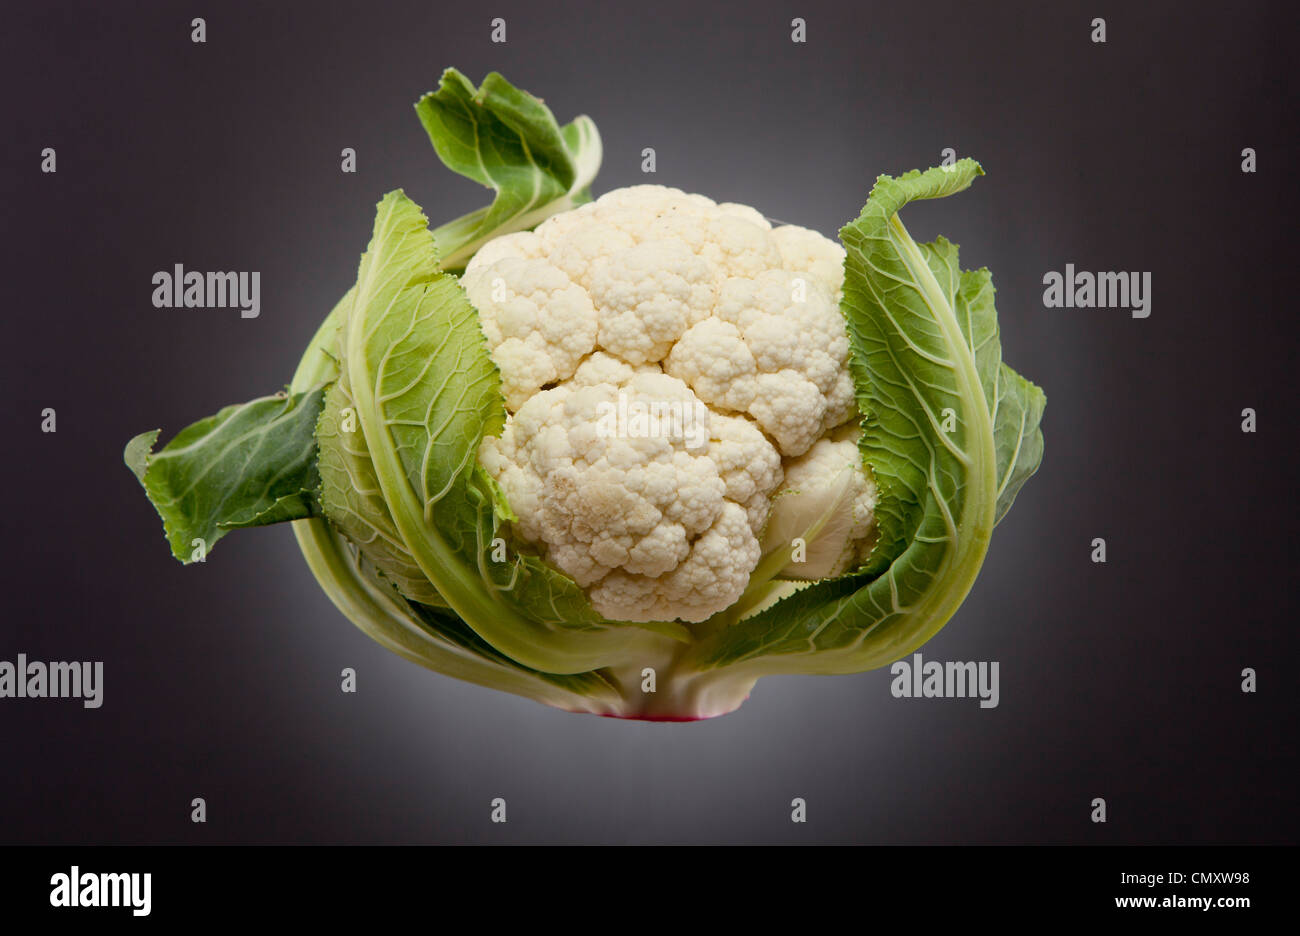 Cauliflower with leaves hanging against a black background photographed in a studio. The vegetable is clean. Stock Photo